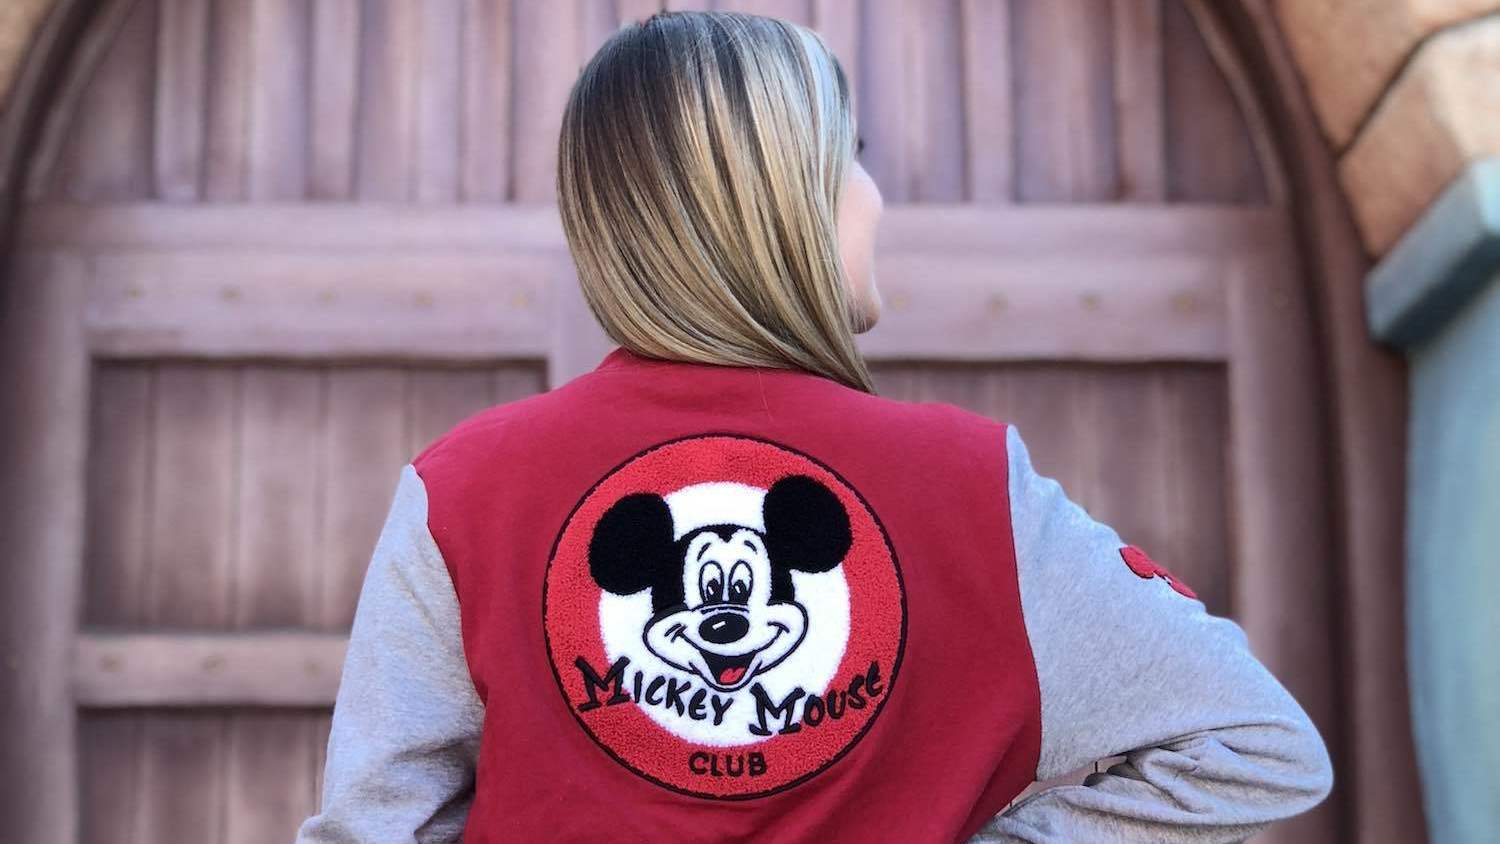 We're Loving the Vintage Vibes of This New Mickey Mouse Club Collection From the Disney Parks